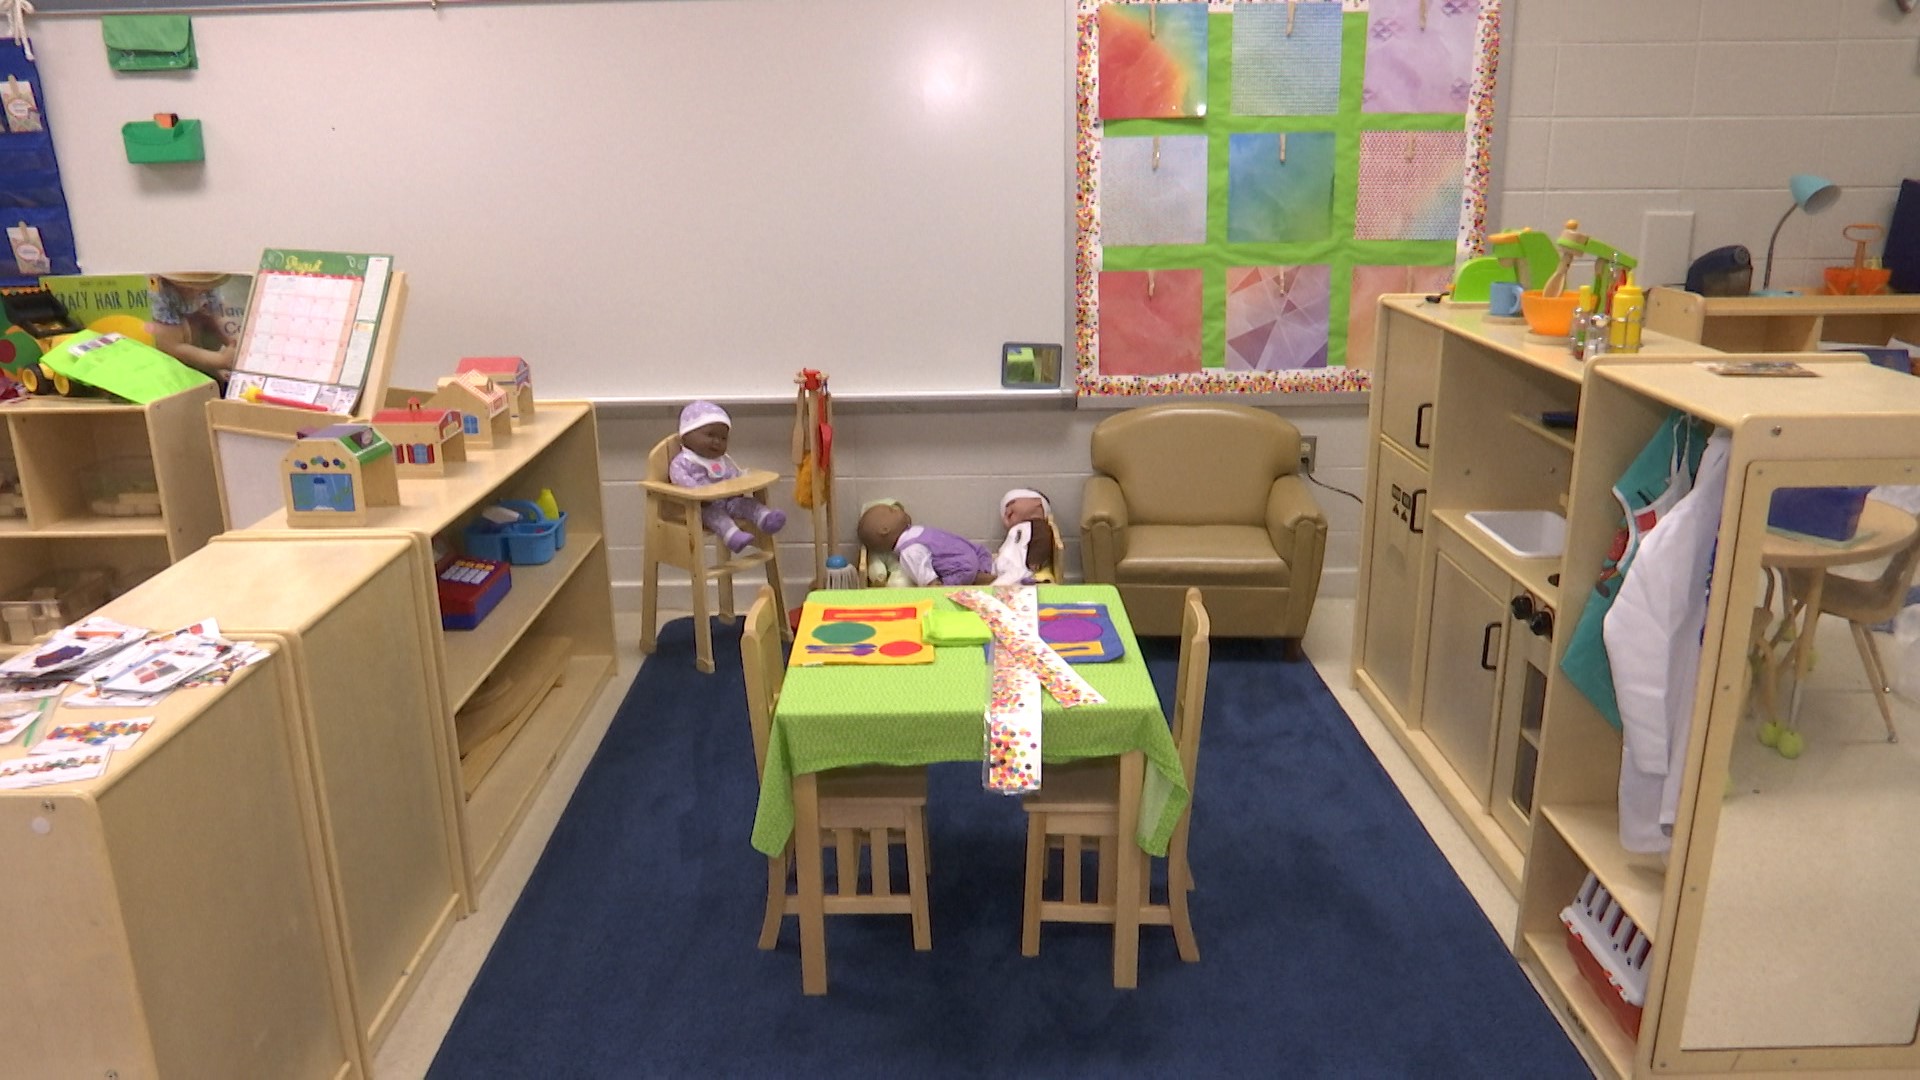 Across the state more than 160 new Pre-K classrooms are getting ready to open their doors for the first time.